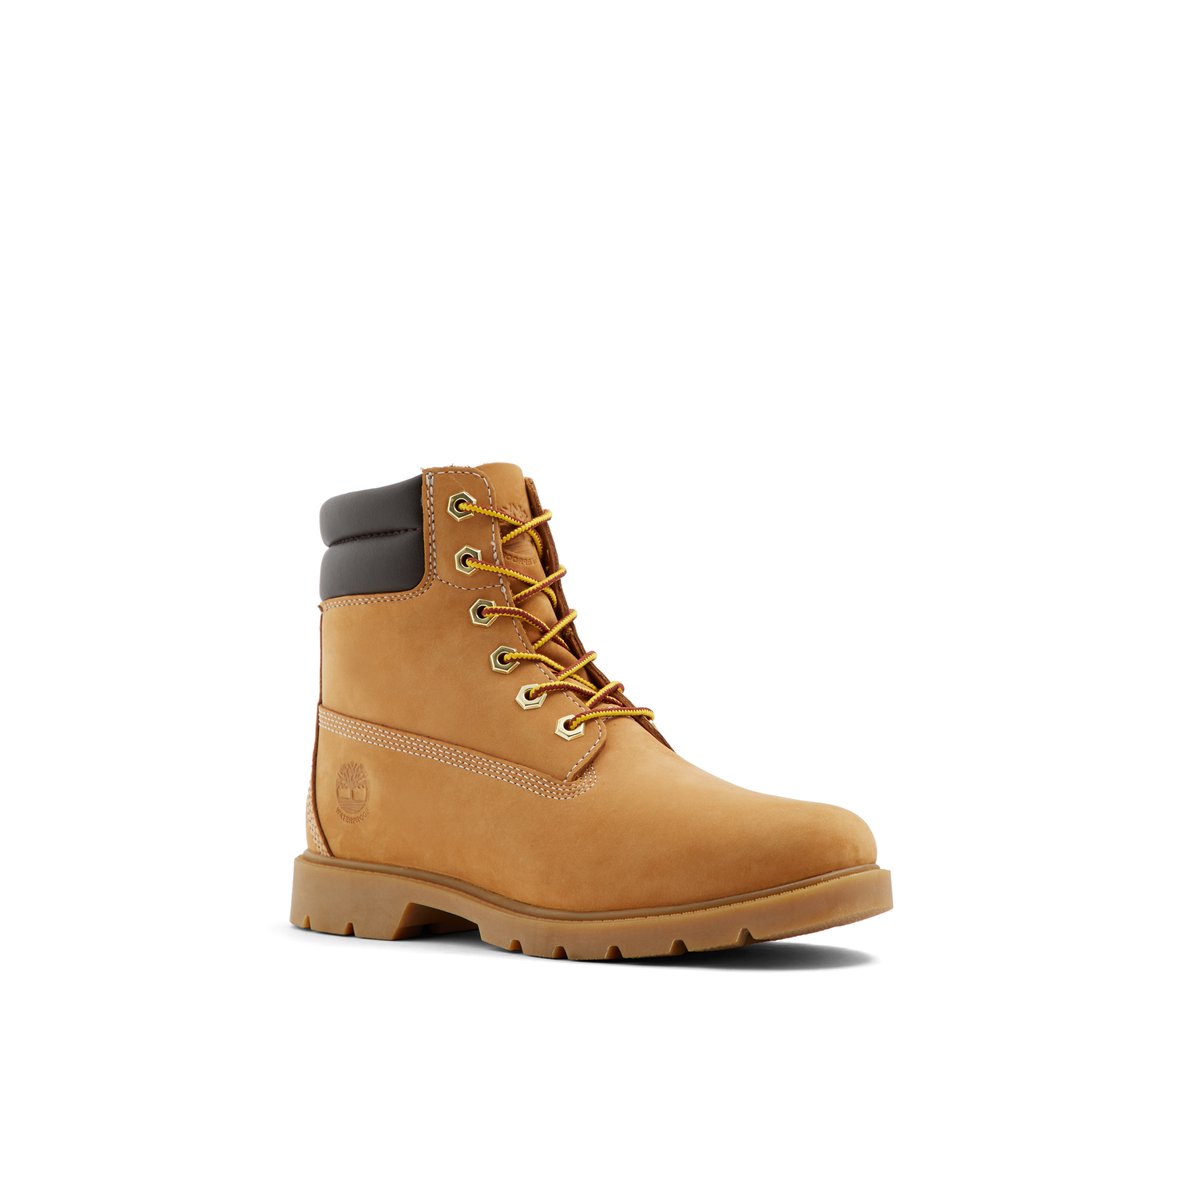 timberland shoes colors